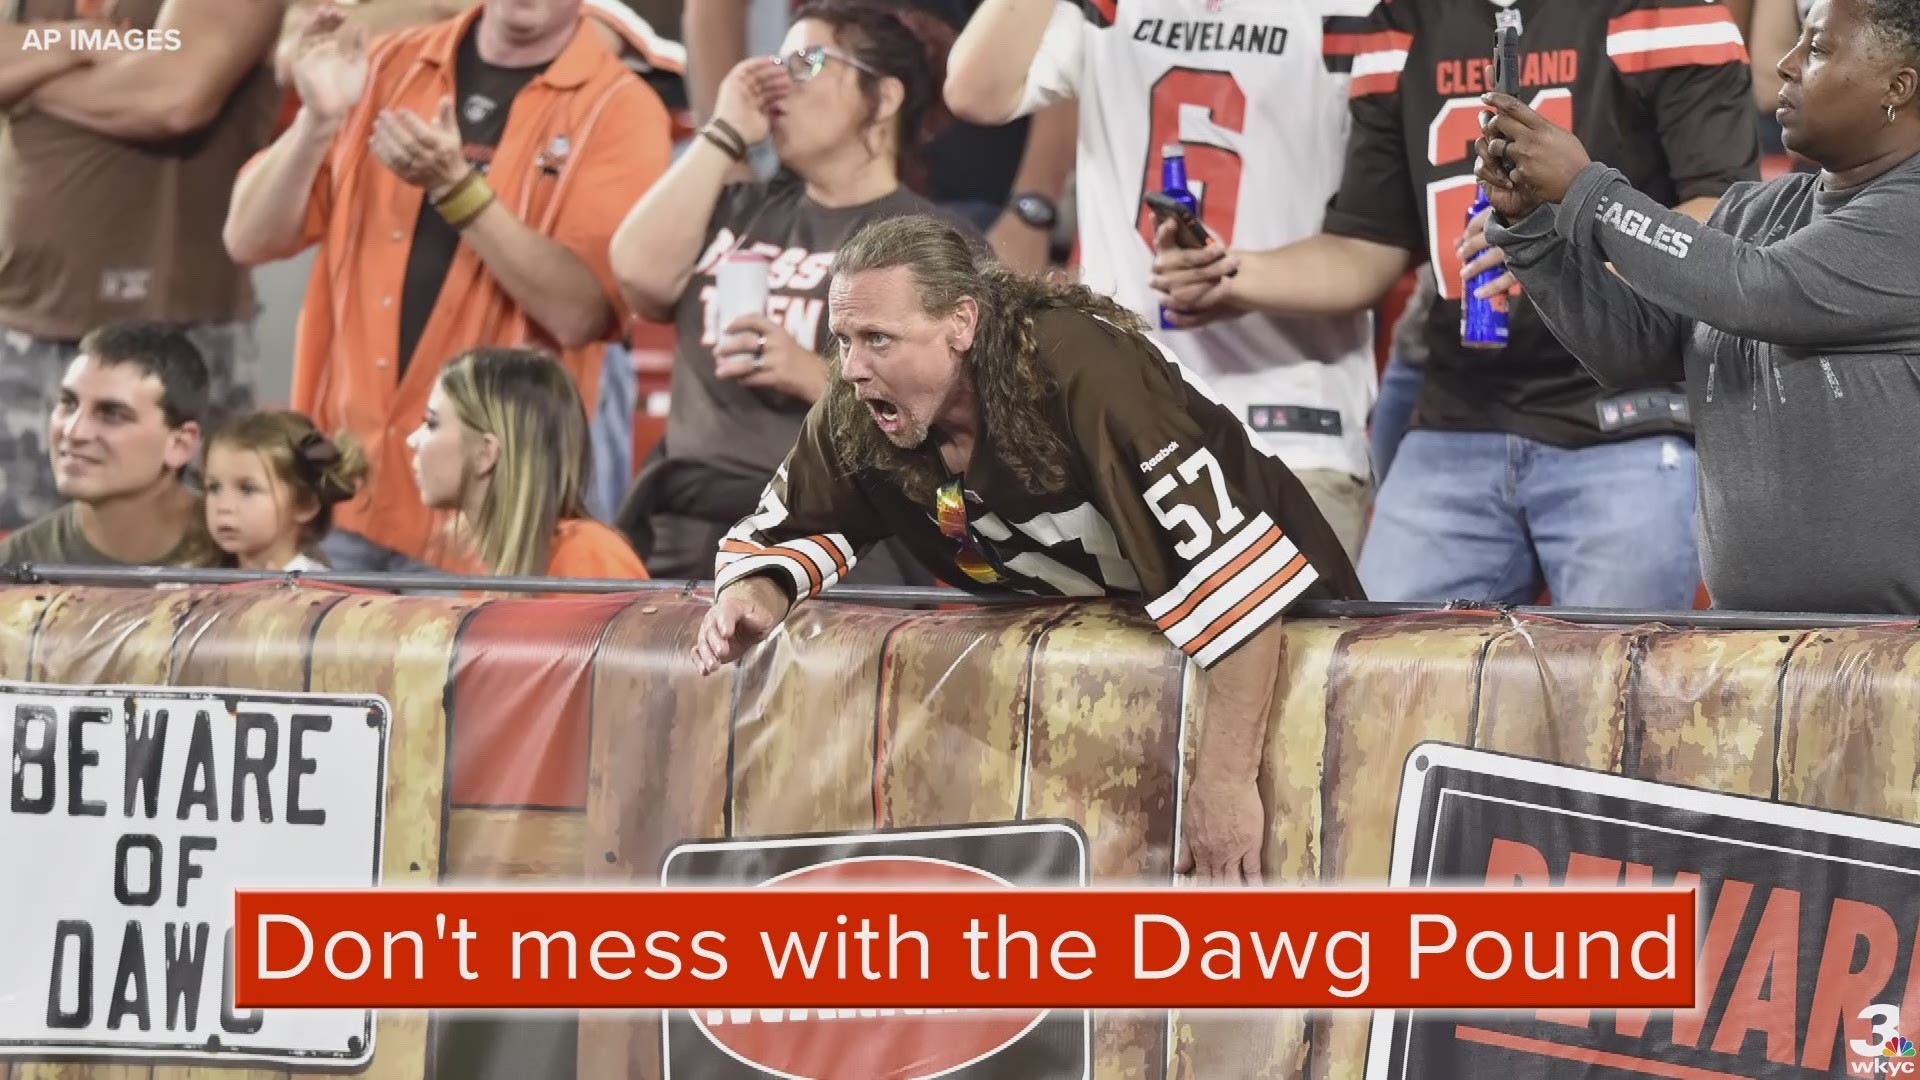 Don't mess with the Dawg Pound.